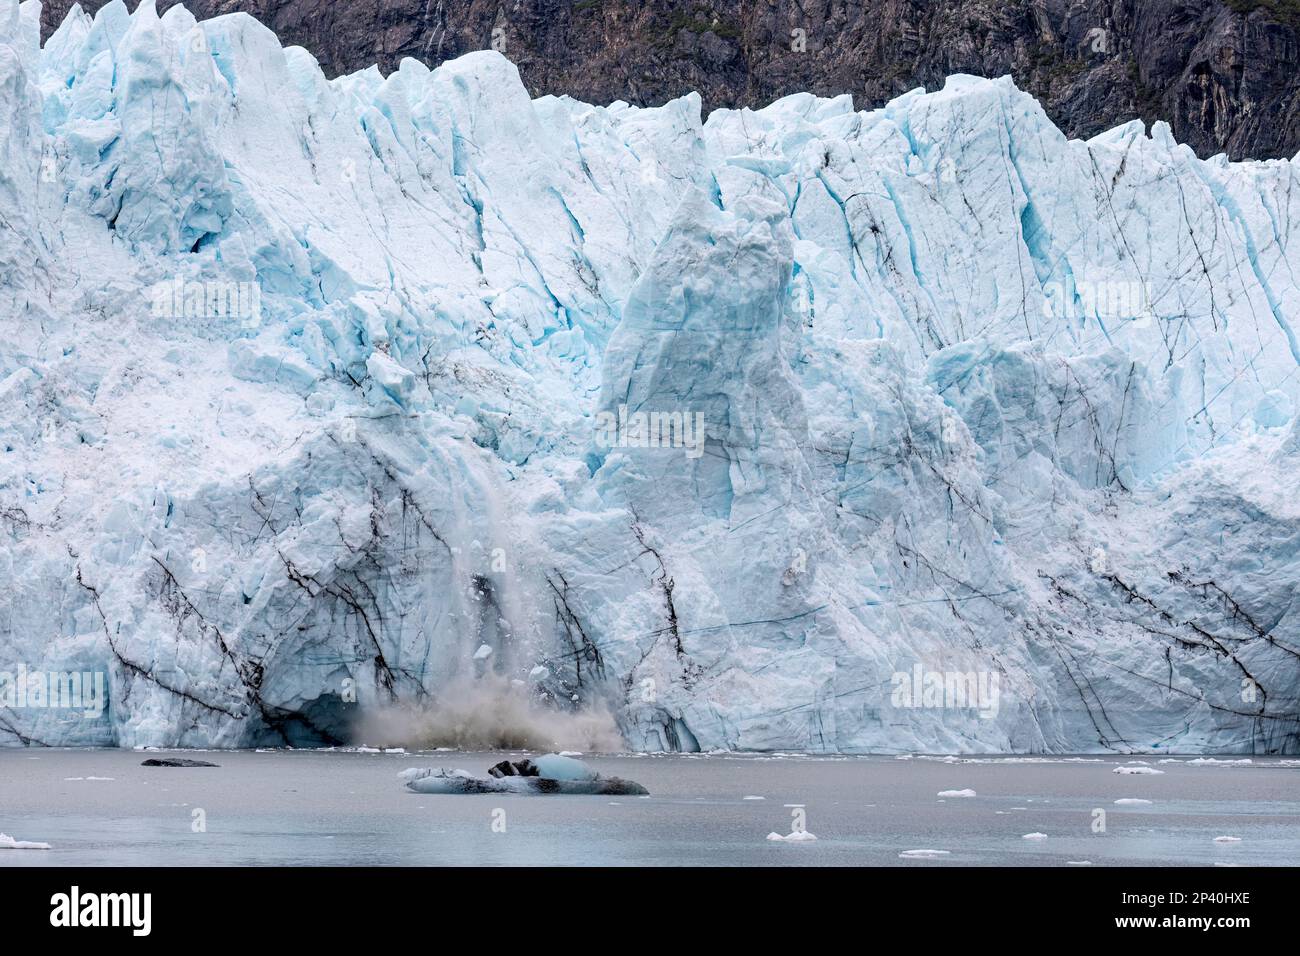 A view of Margerie Glacier calving in the Fair-weather Range, Glacier Bay National Park, Southeast Alaska, USA. Stock Photo